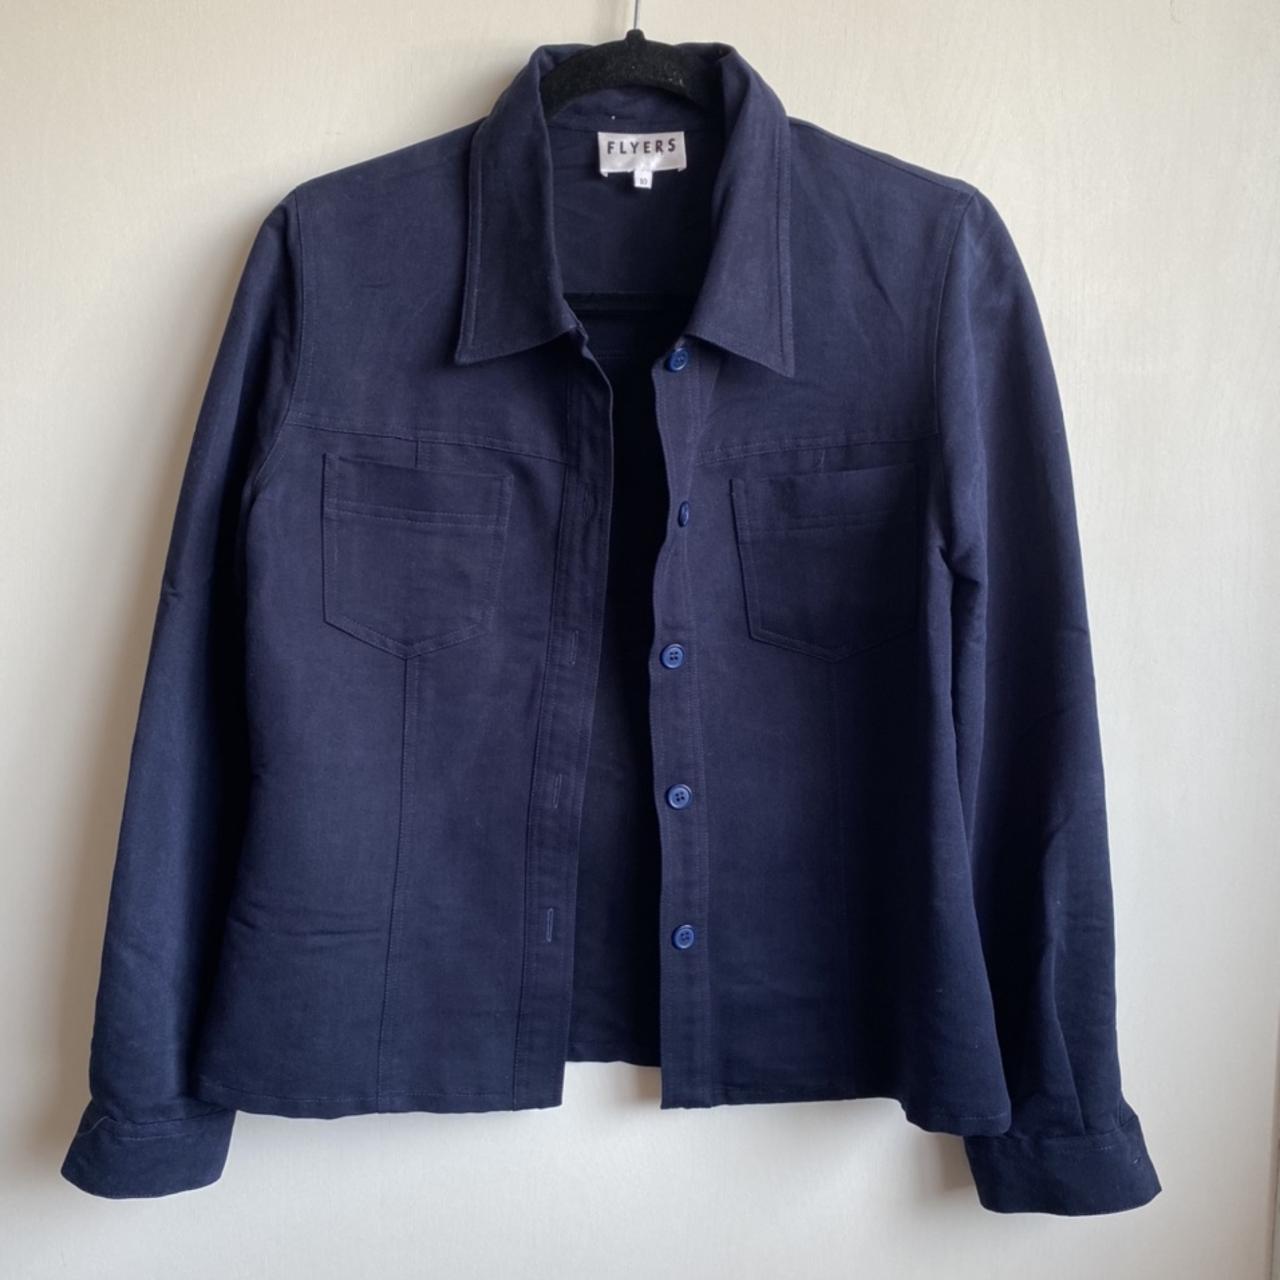 Product Image 1 - Navy blue button up shirt/very